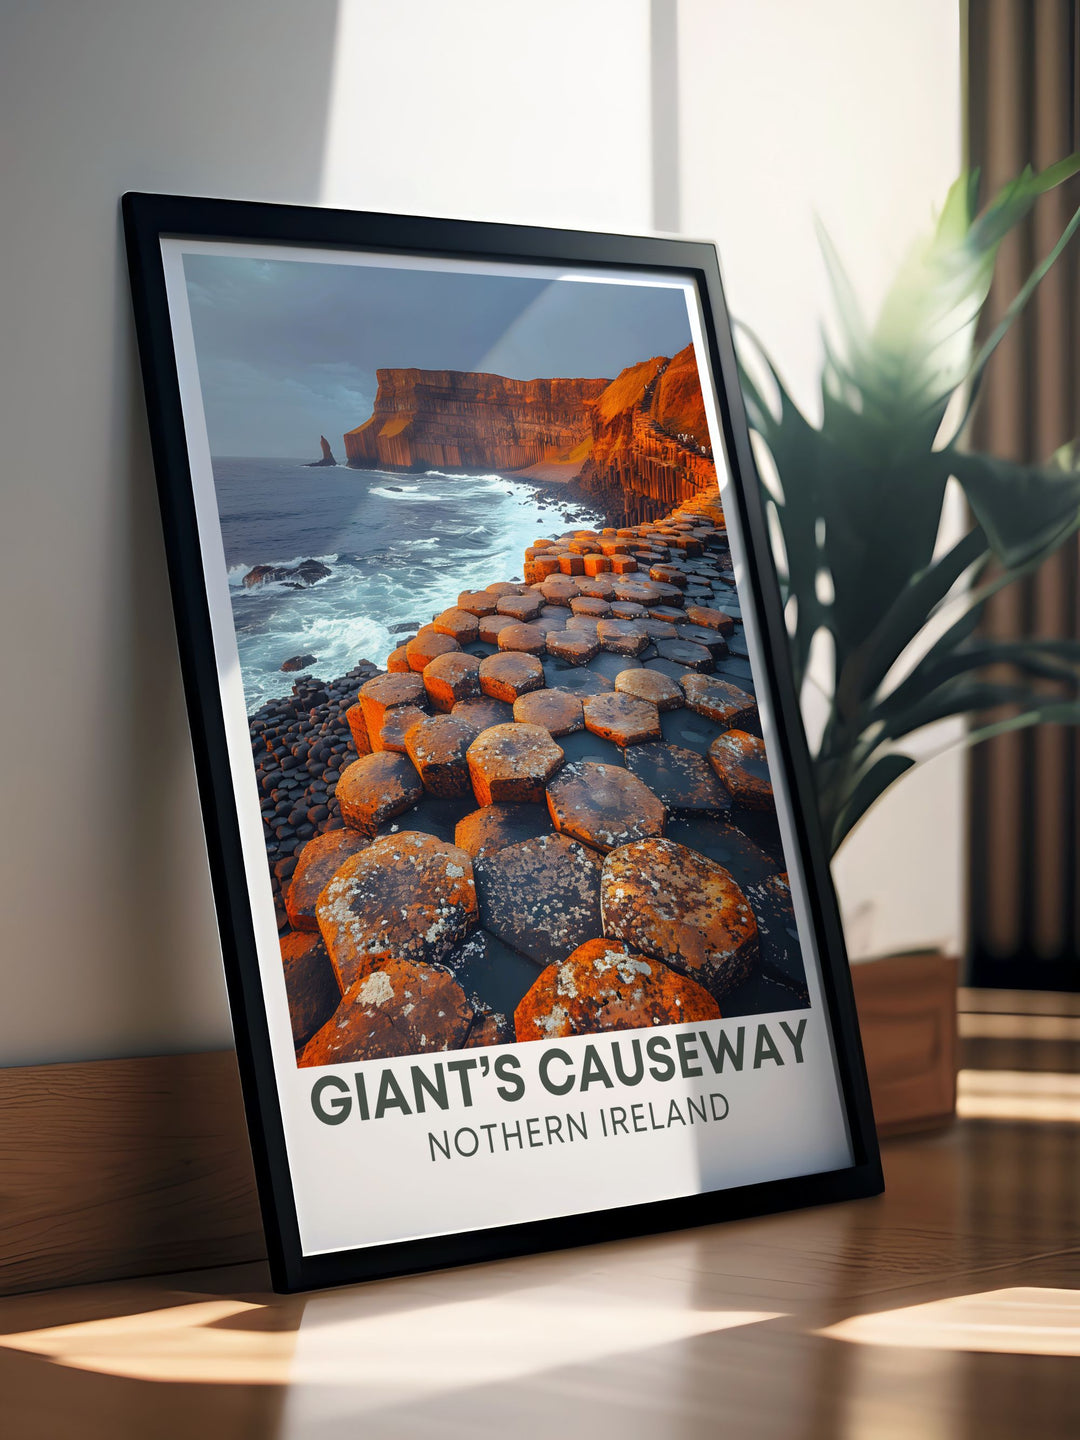 Framed art illustrating the natural beauty of Giants Causeway, with its unique basalt columns and scenic coastal views, reflecting the mystical and picturesque landscapes of Northern Ireland.